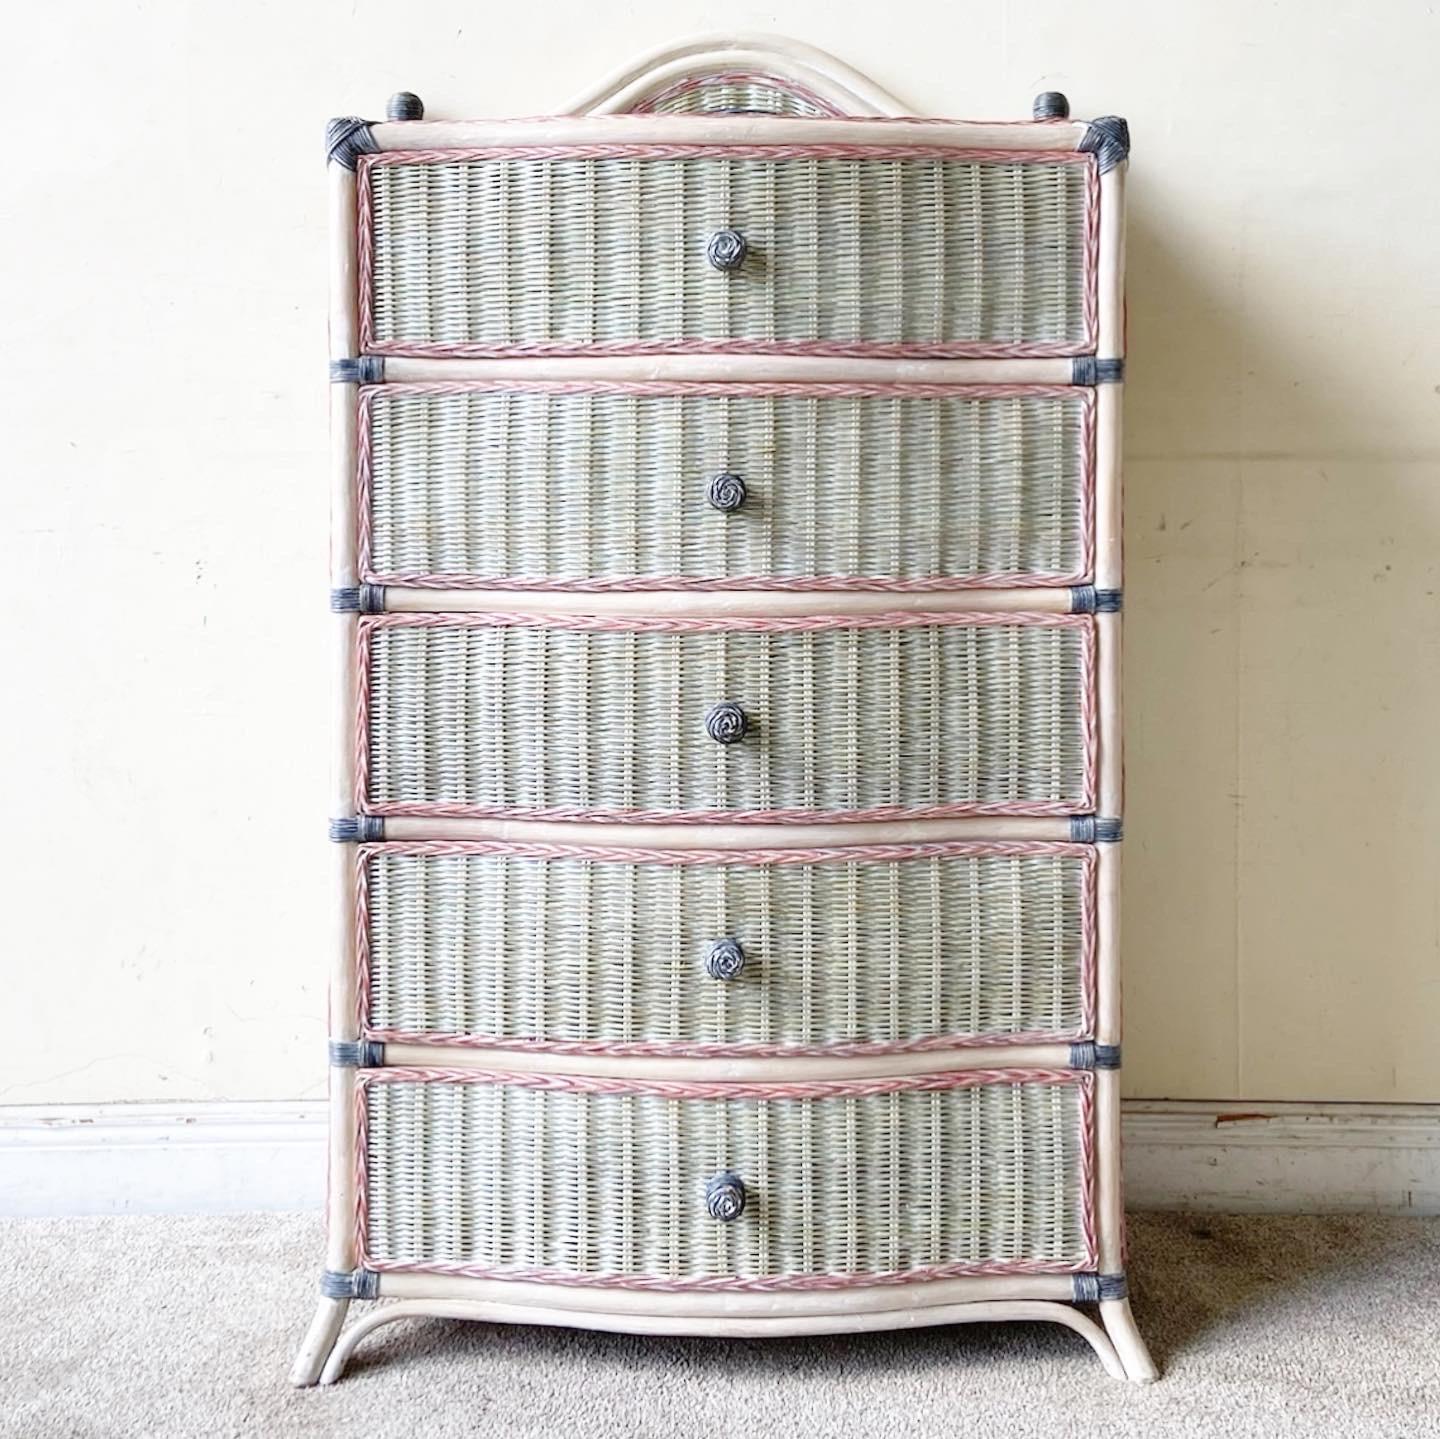 Exceptional vintage boho chic bamboo rattan and wicker Highboy dresser. Features an off white and pink finish with kindred gray accents and 5 spacious drawers.